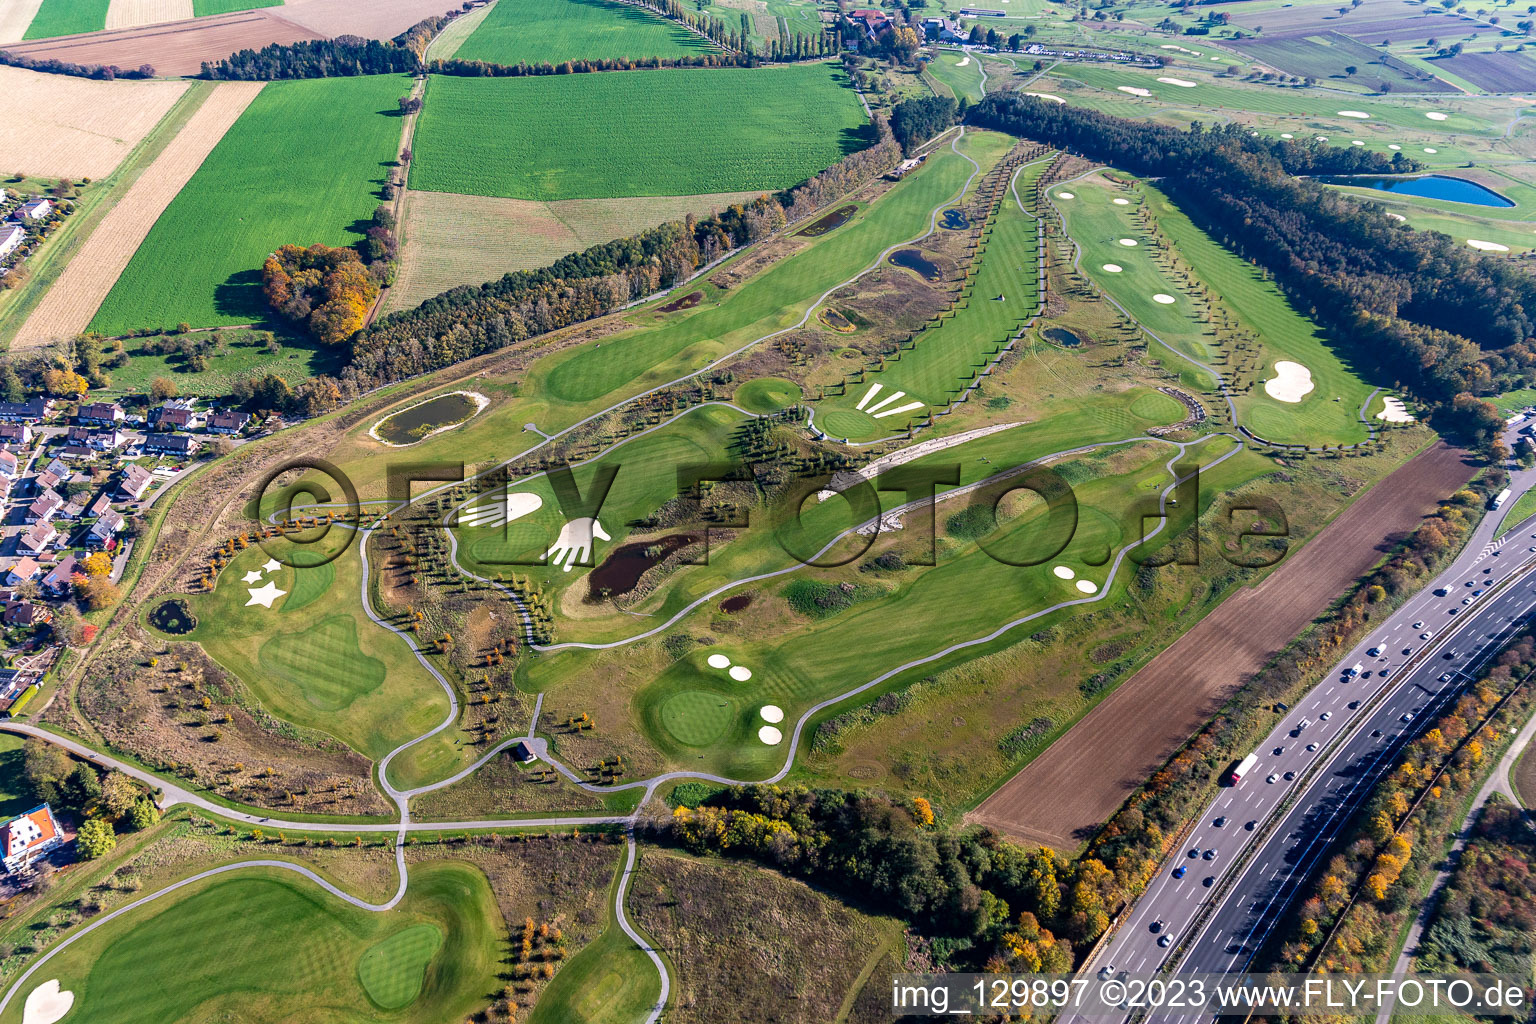 Grounds of the Golf course at Golfpark Karlsruhe GOLF absolute in Karlsruhe in the state Baden-Wuerttemberg, Germany seen from above